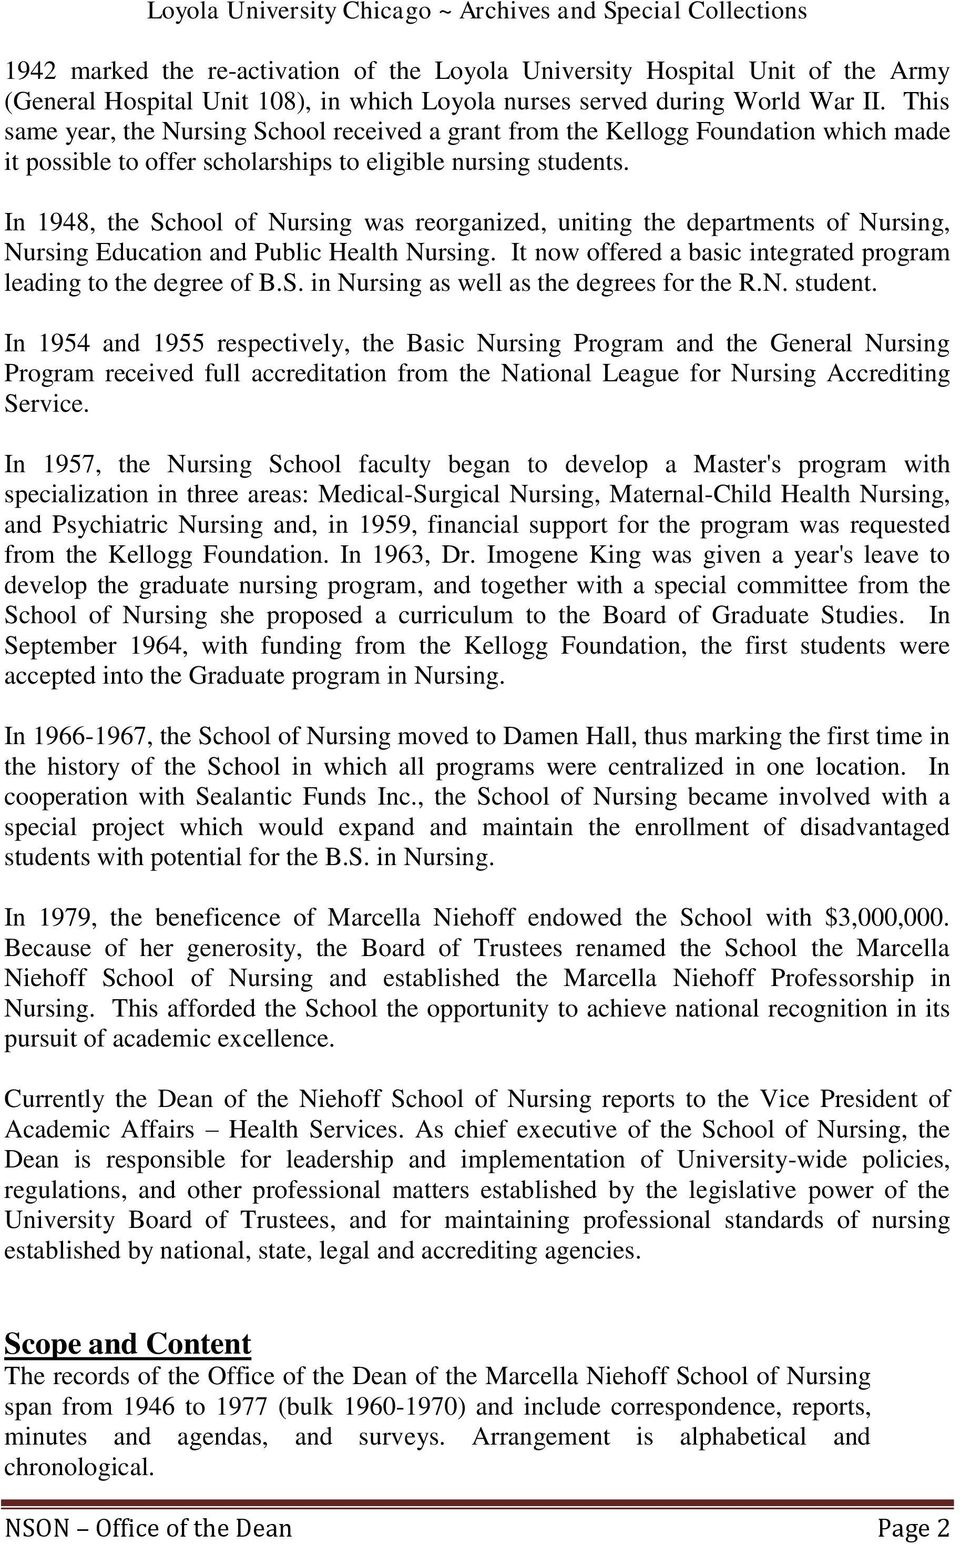 In 1948, the School of Nursing was reorganized, uniting the departments of Nursing, Nursing Education and Public Health Nursing. It now offered a basic integrated program leading to the degree of B.S. in Nursing as well as the degrees for the R.